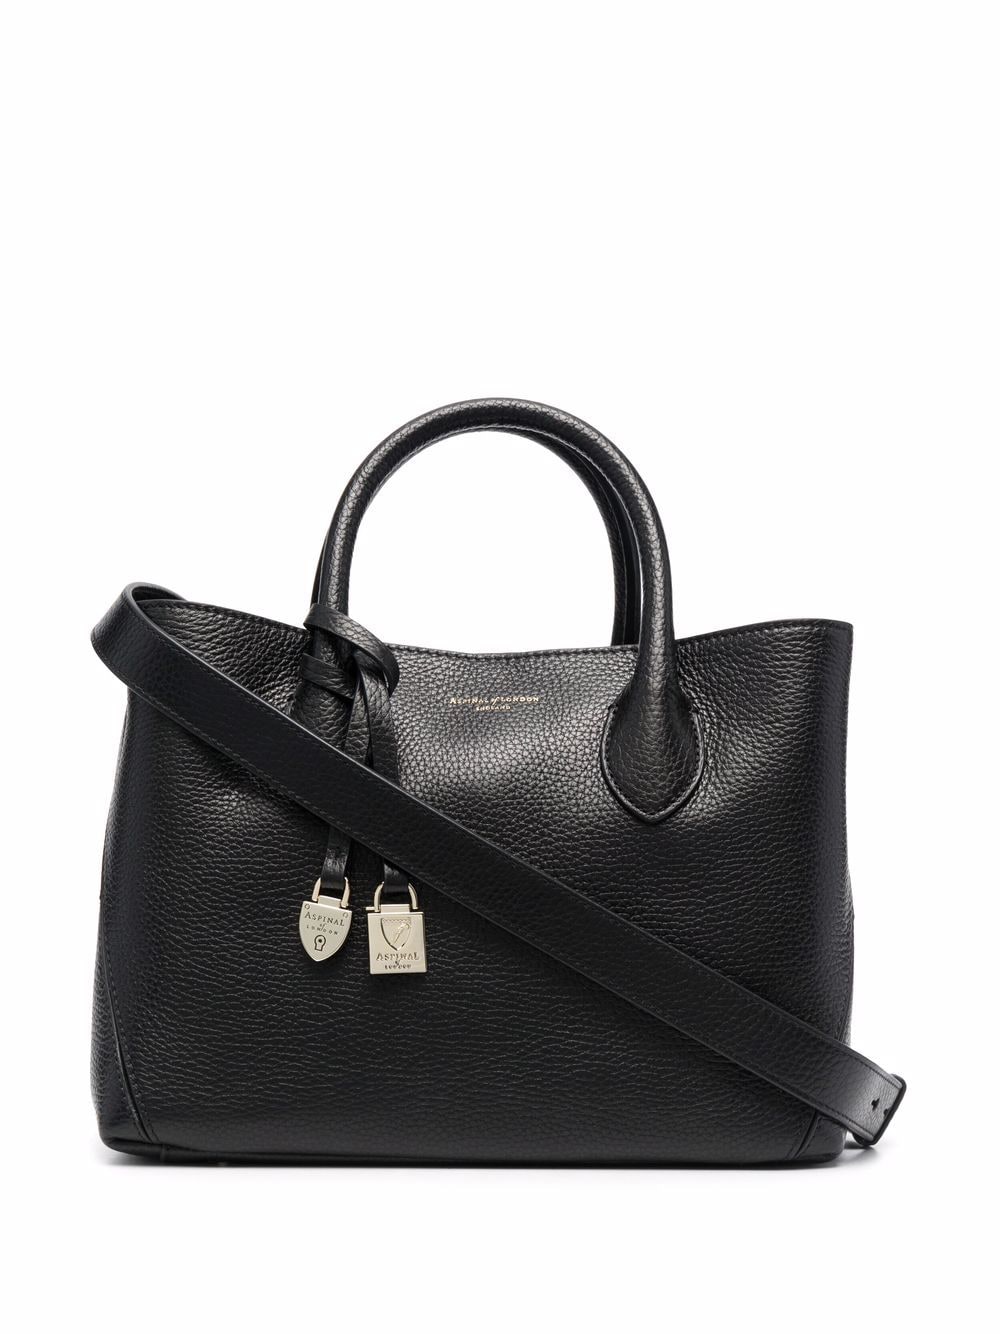 Aspinal Of London London leather tote - Black von Aspinal Of London